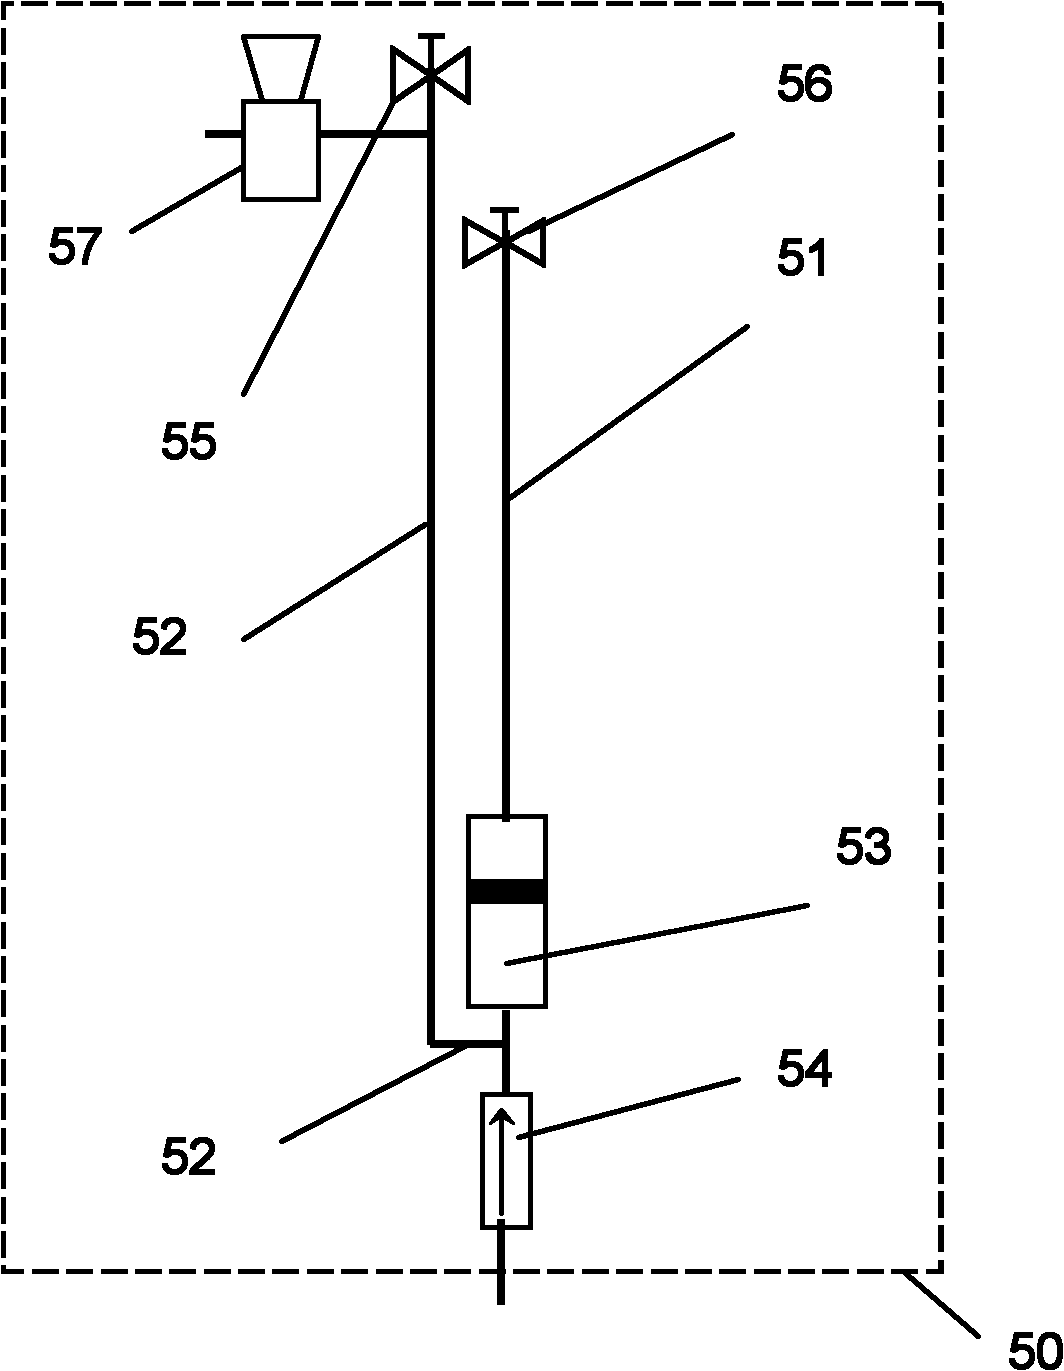 Underground layered gas-liquid two phase fluid pressure and temperature-retaining sampling device